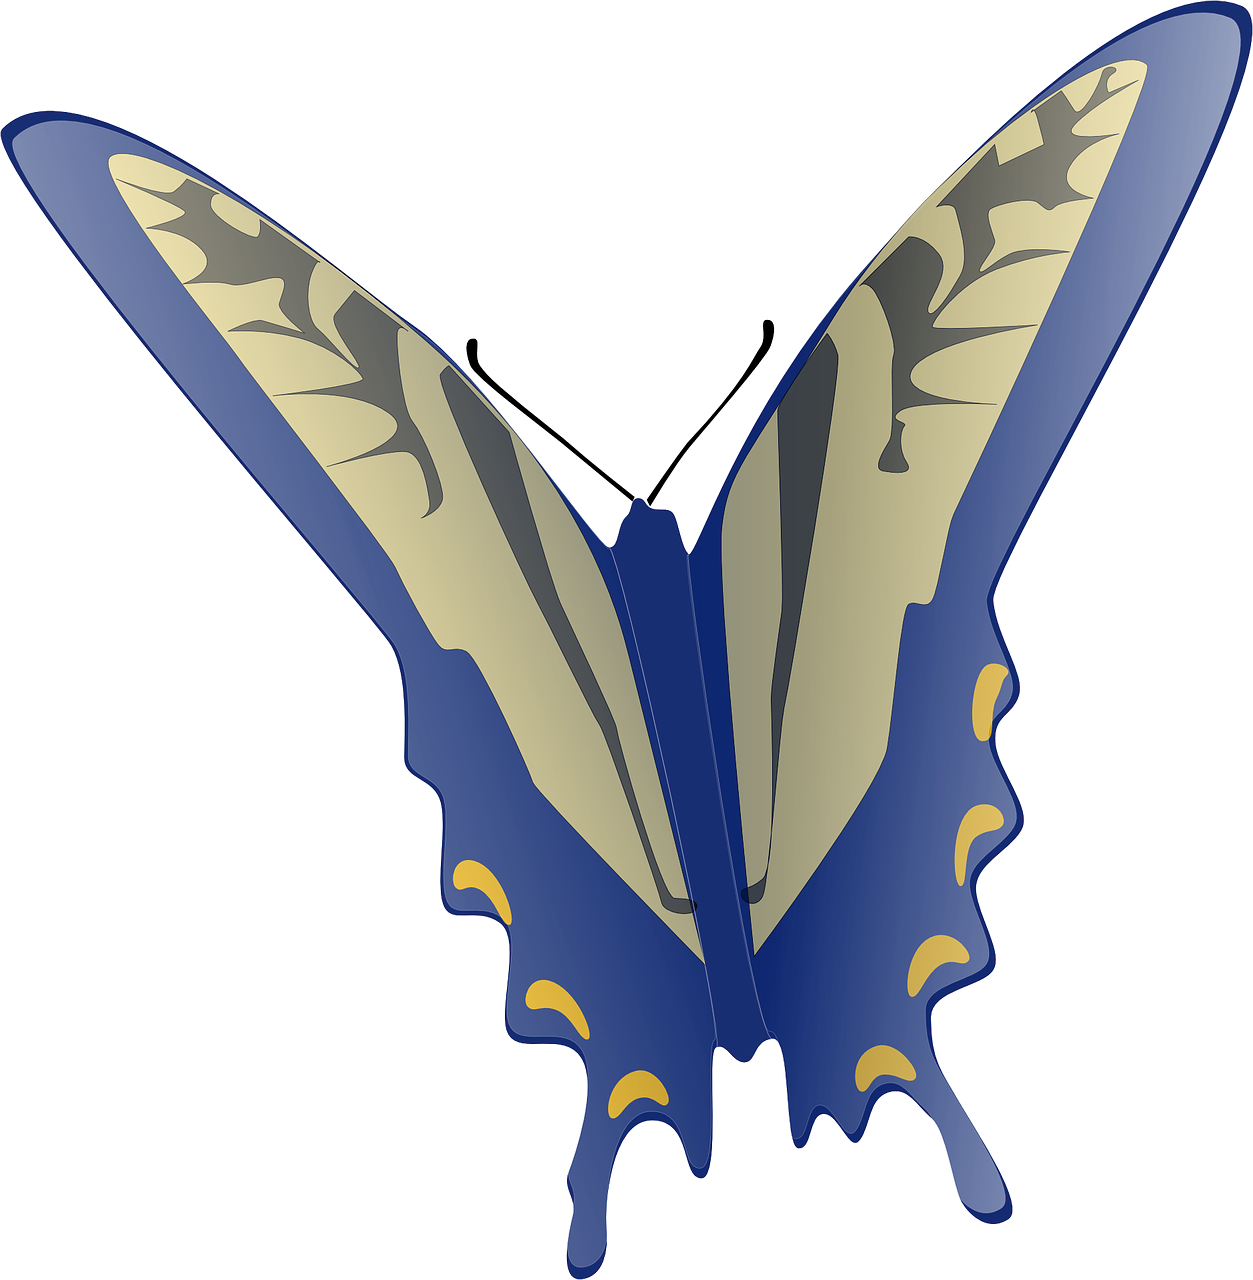 Butterfly Clip Art At Clker - Animated Flying Butterfly Gif (1253x1280)